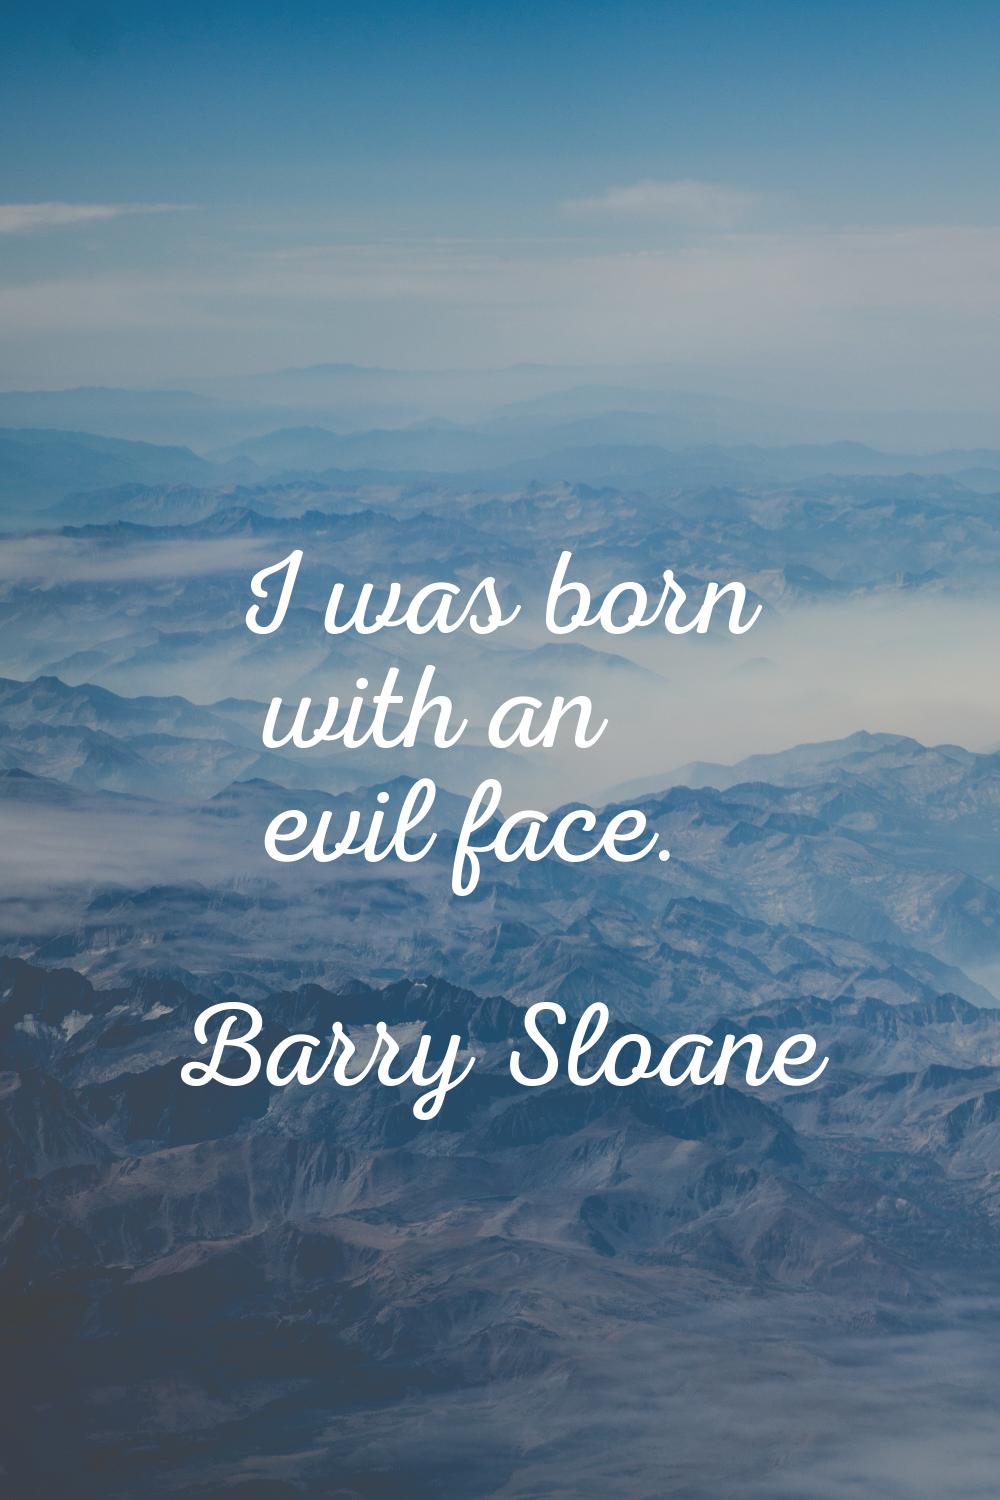 I was born with an evil face.